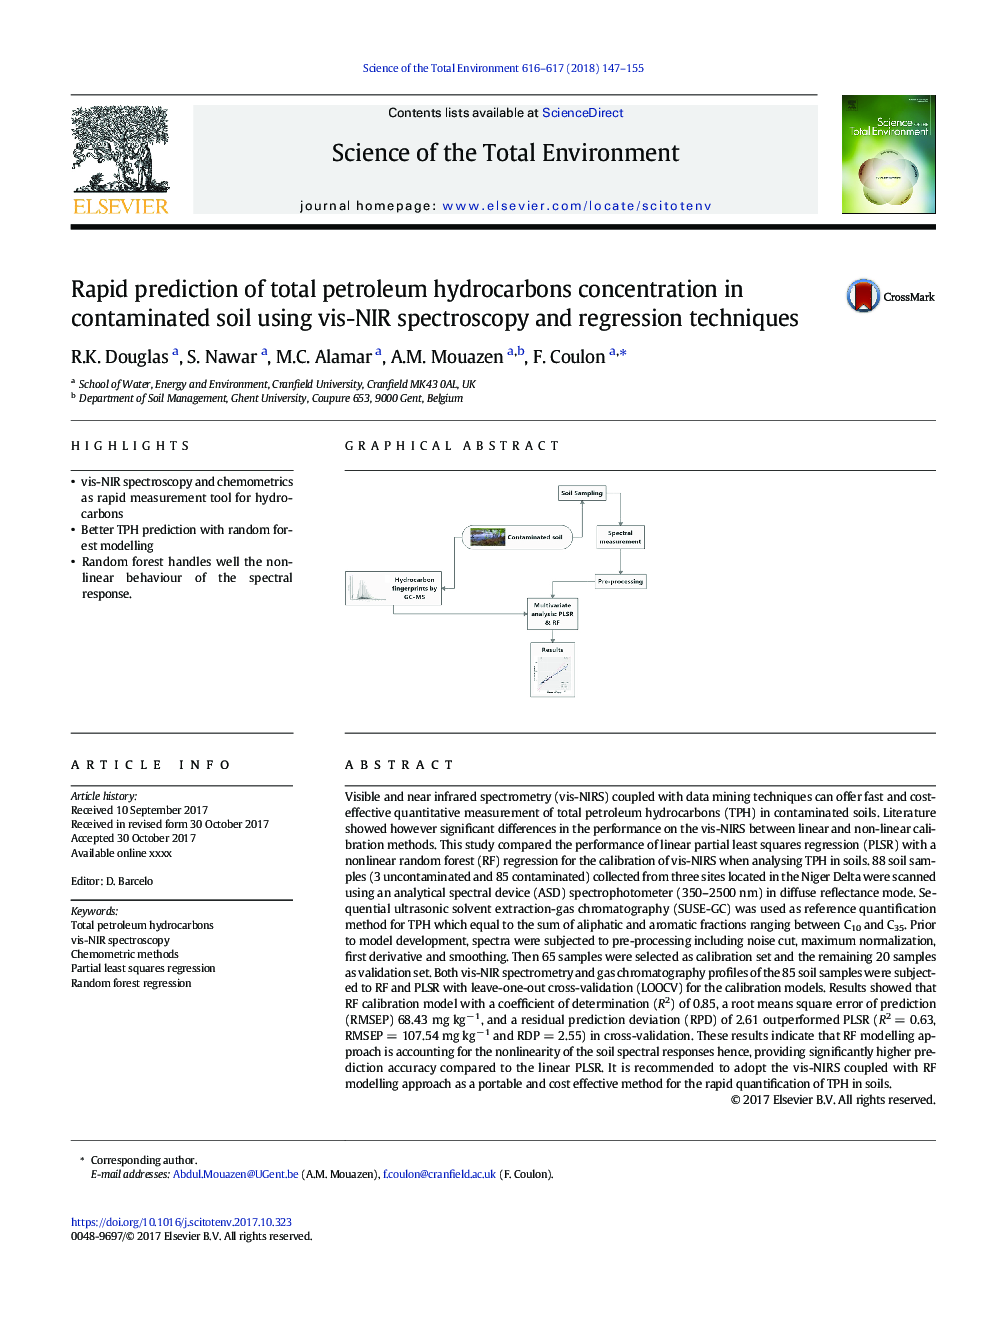 Rapid prediction of total petroleum hydrocarbons concentration in contaminated soil using vis-NIR spectroscopy and regression techniques